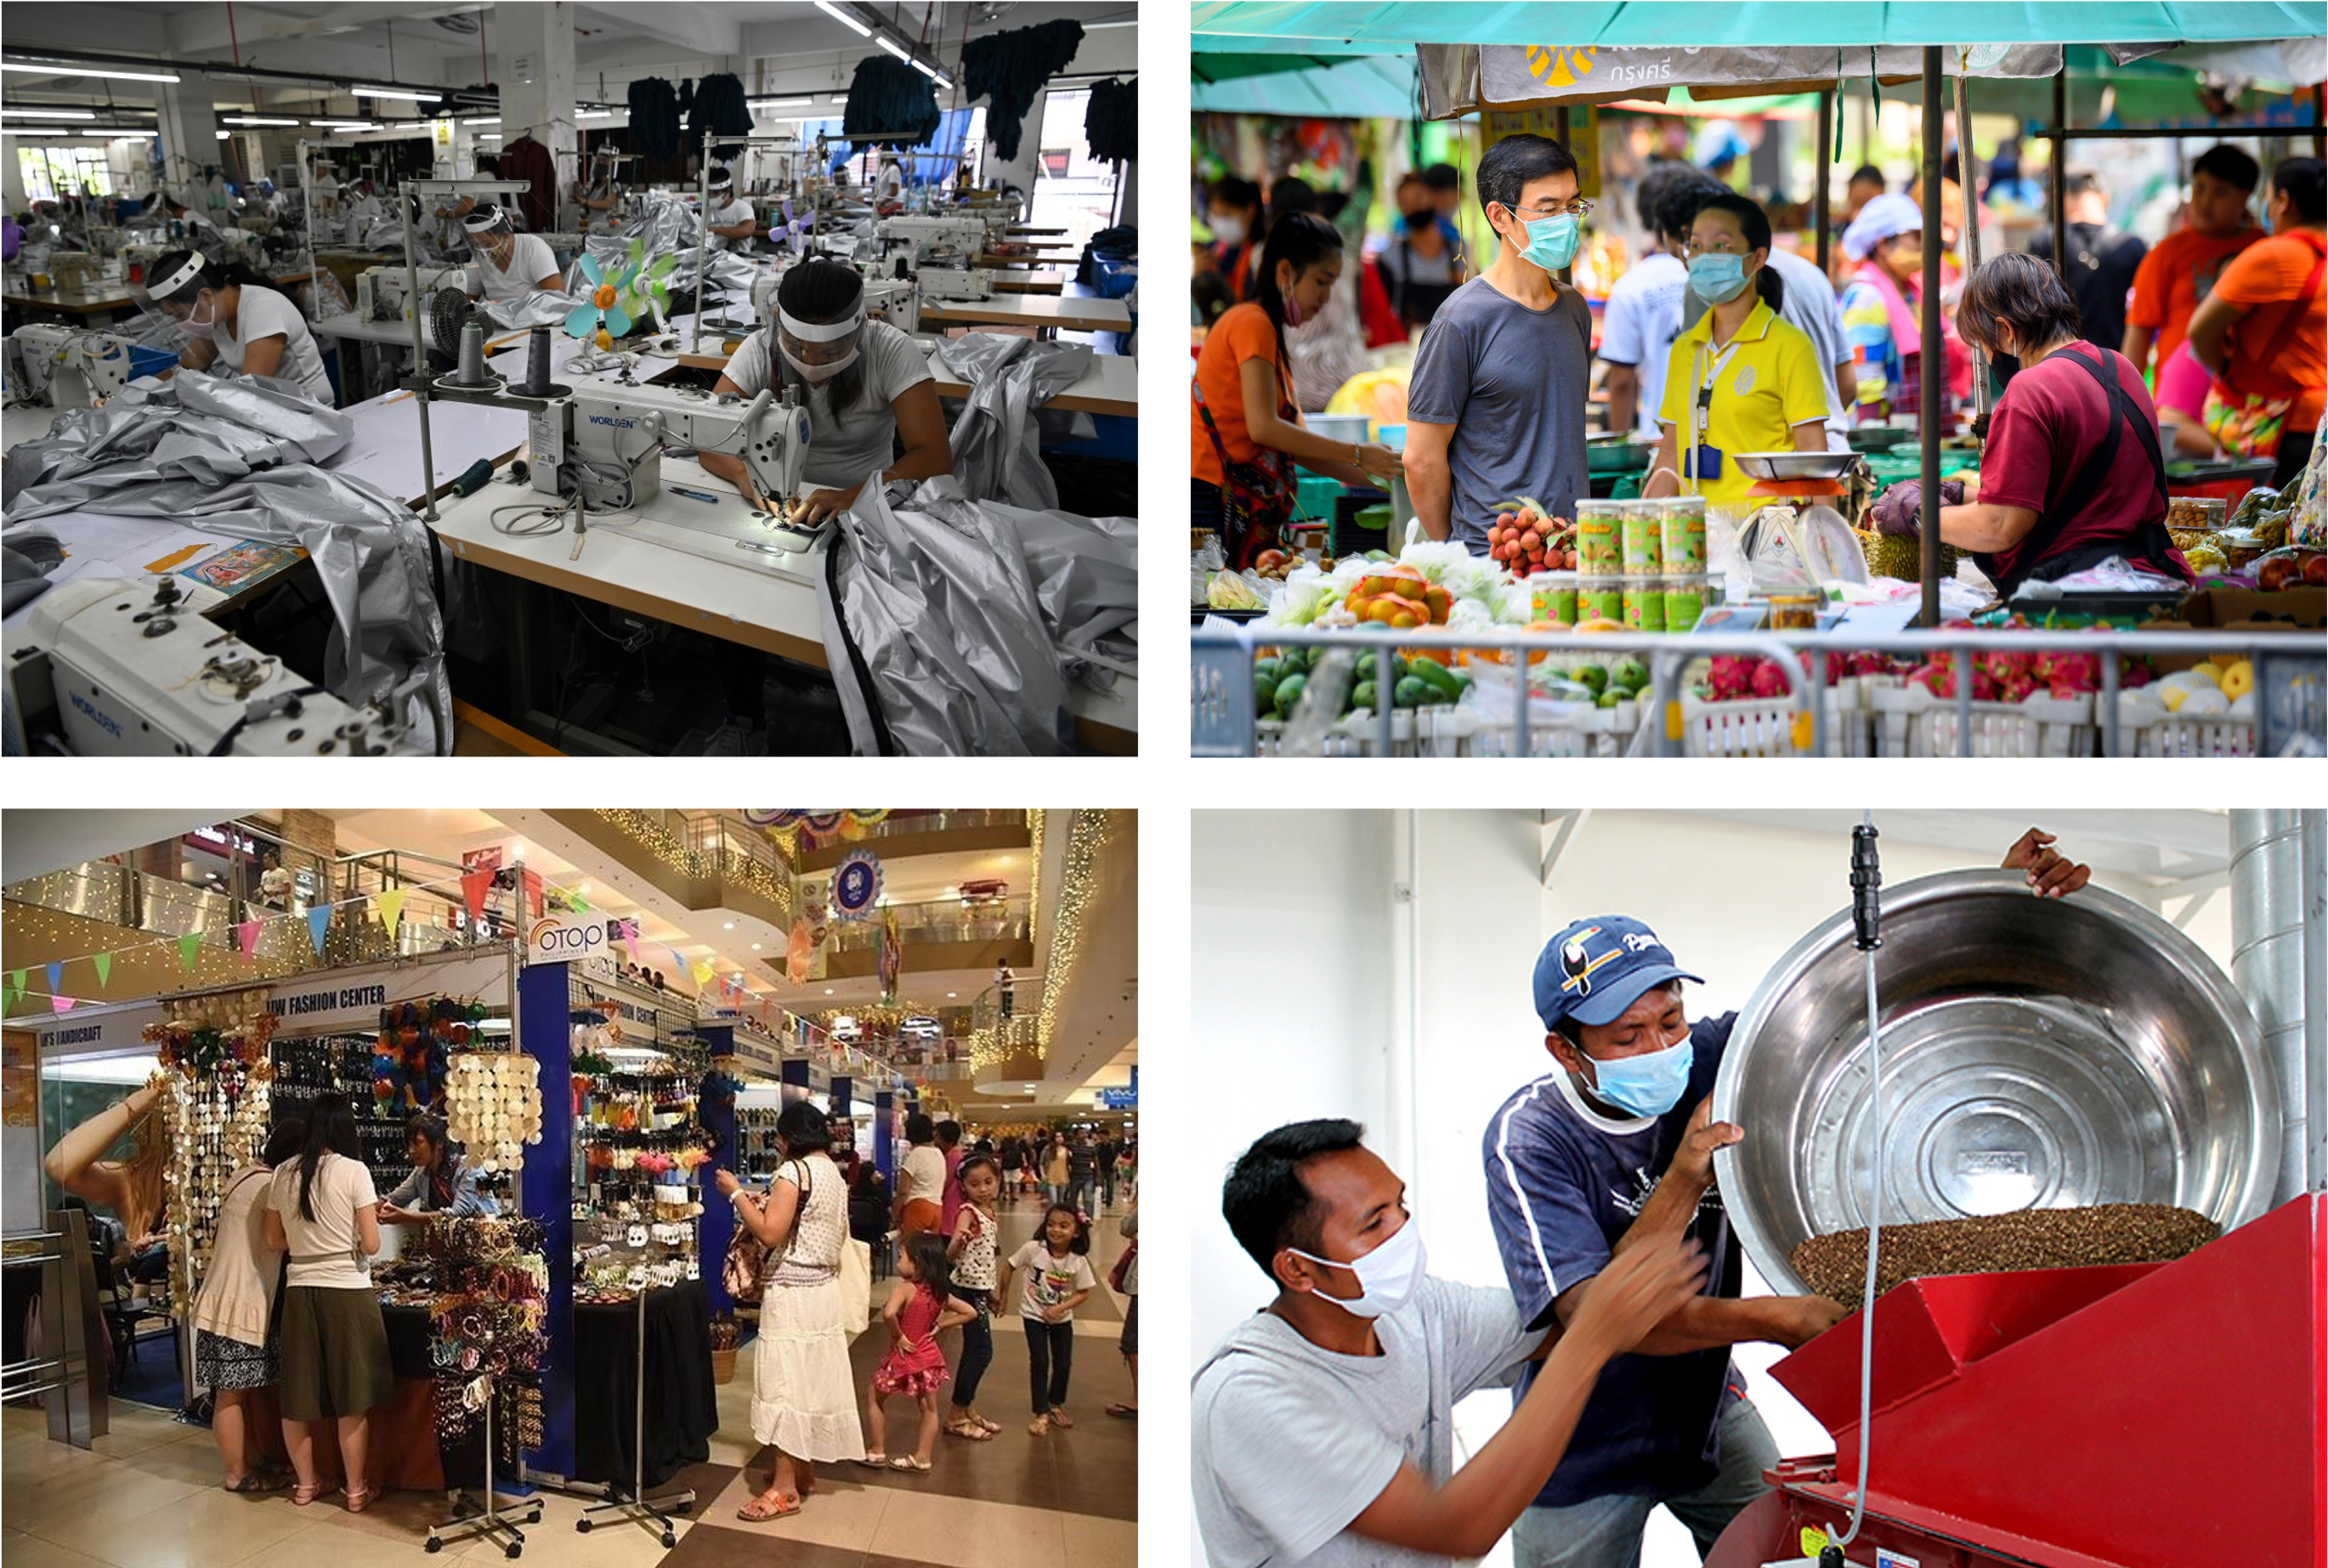 The empowerment of local industries in the Philippines